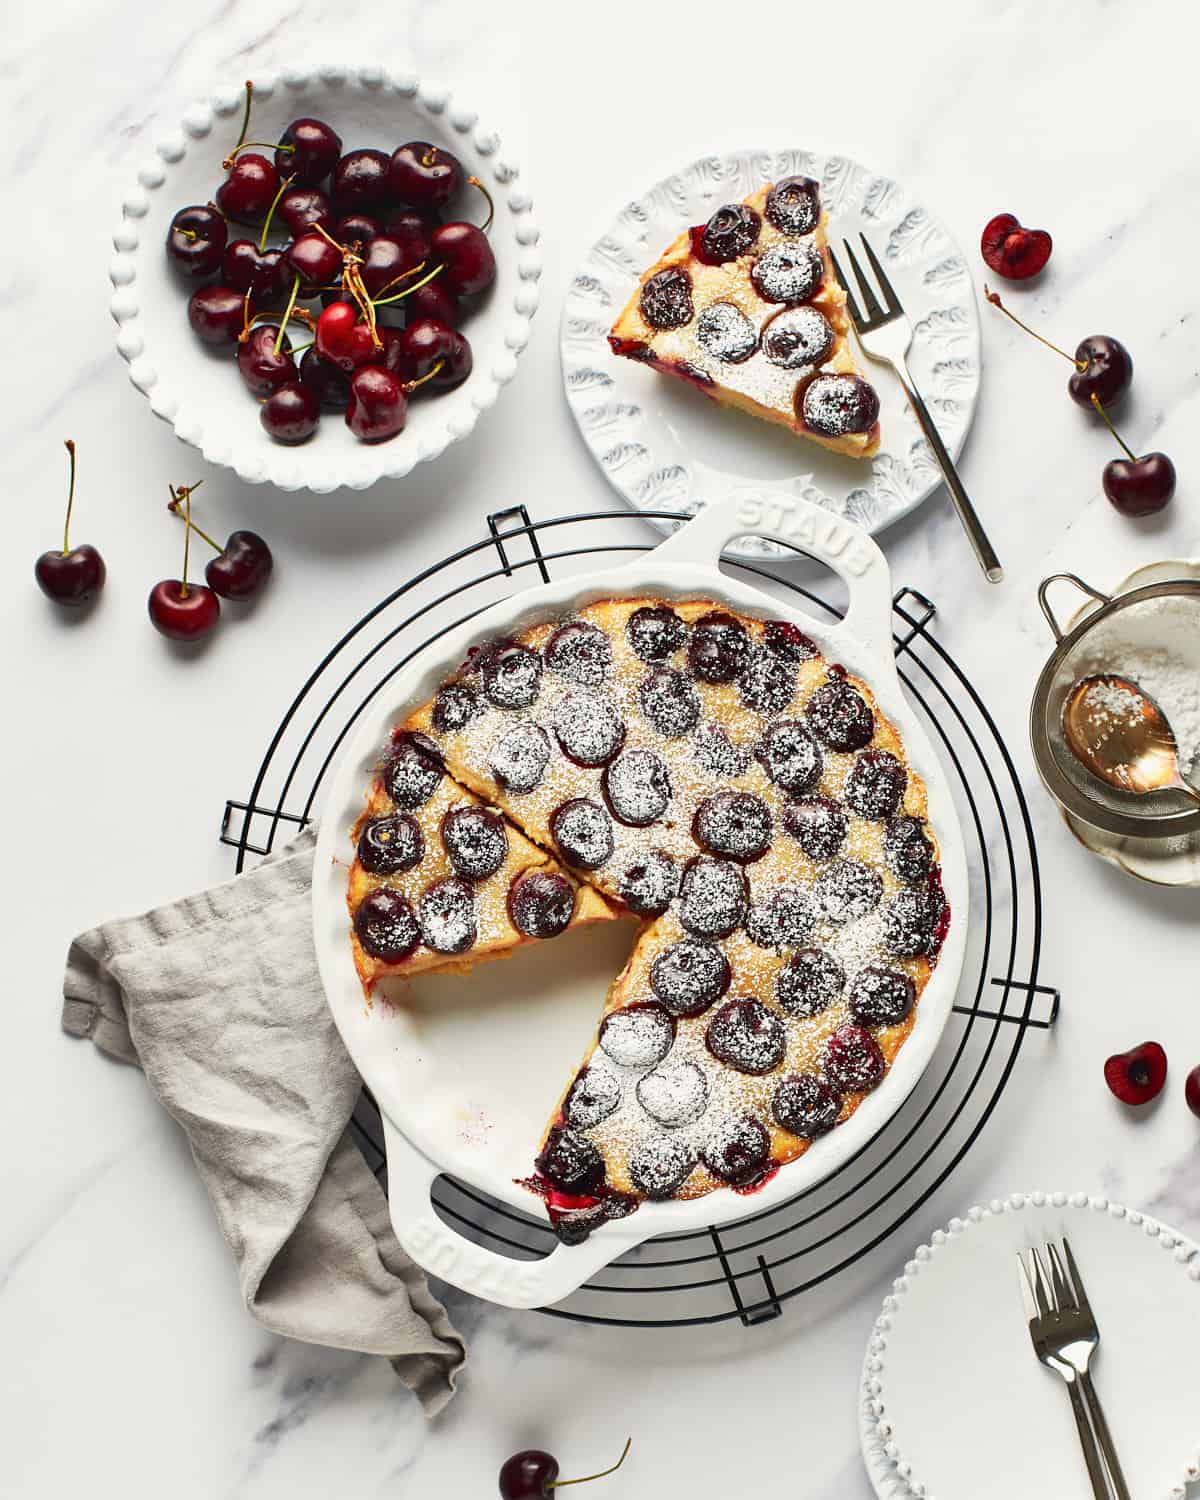 Overhead view of Vegan Clafoutis with a slice on a white plate with a small bowl of cherries.